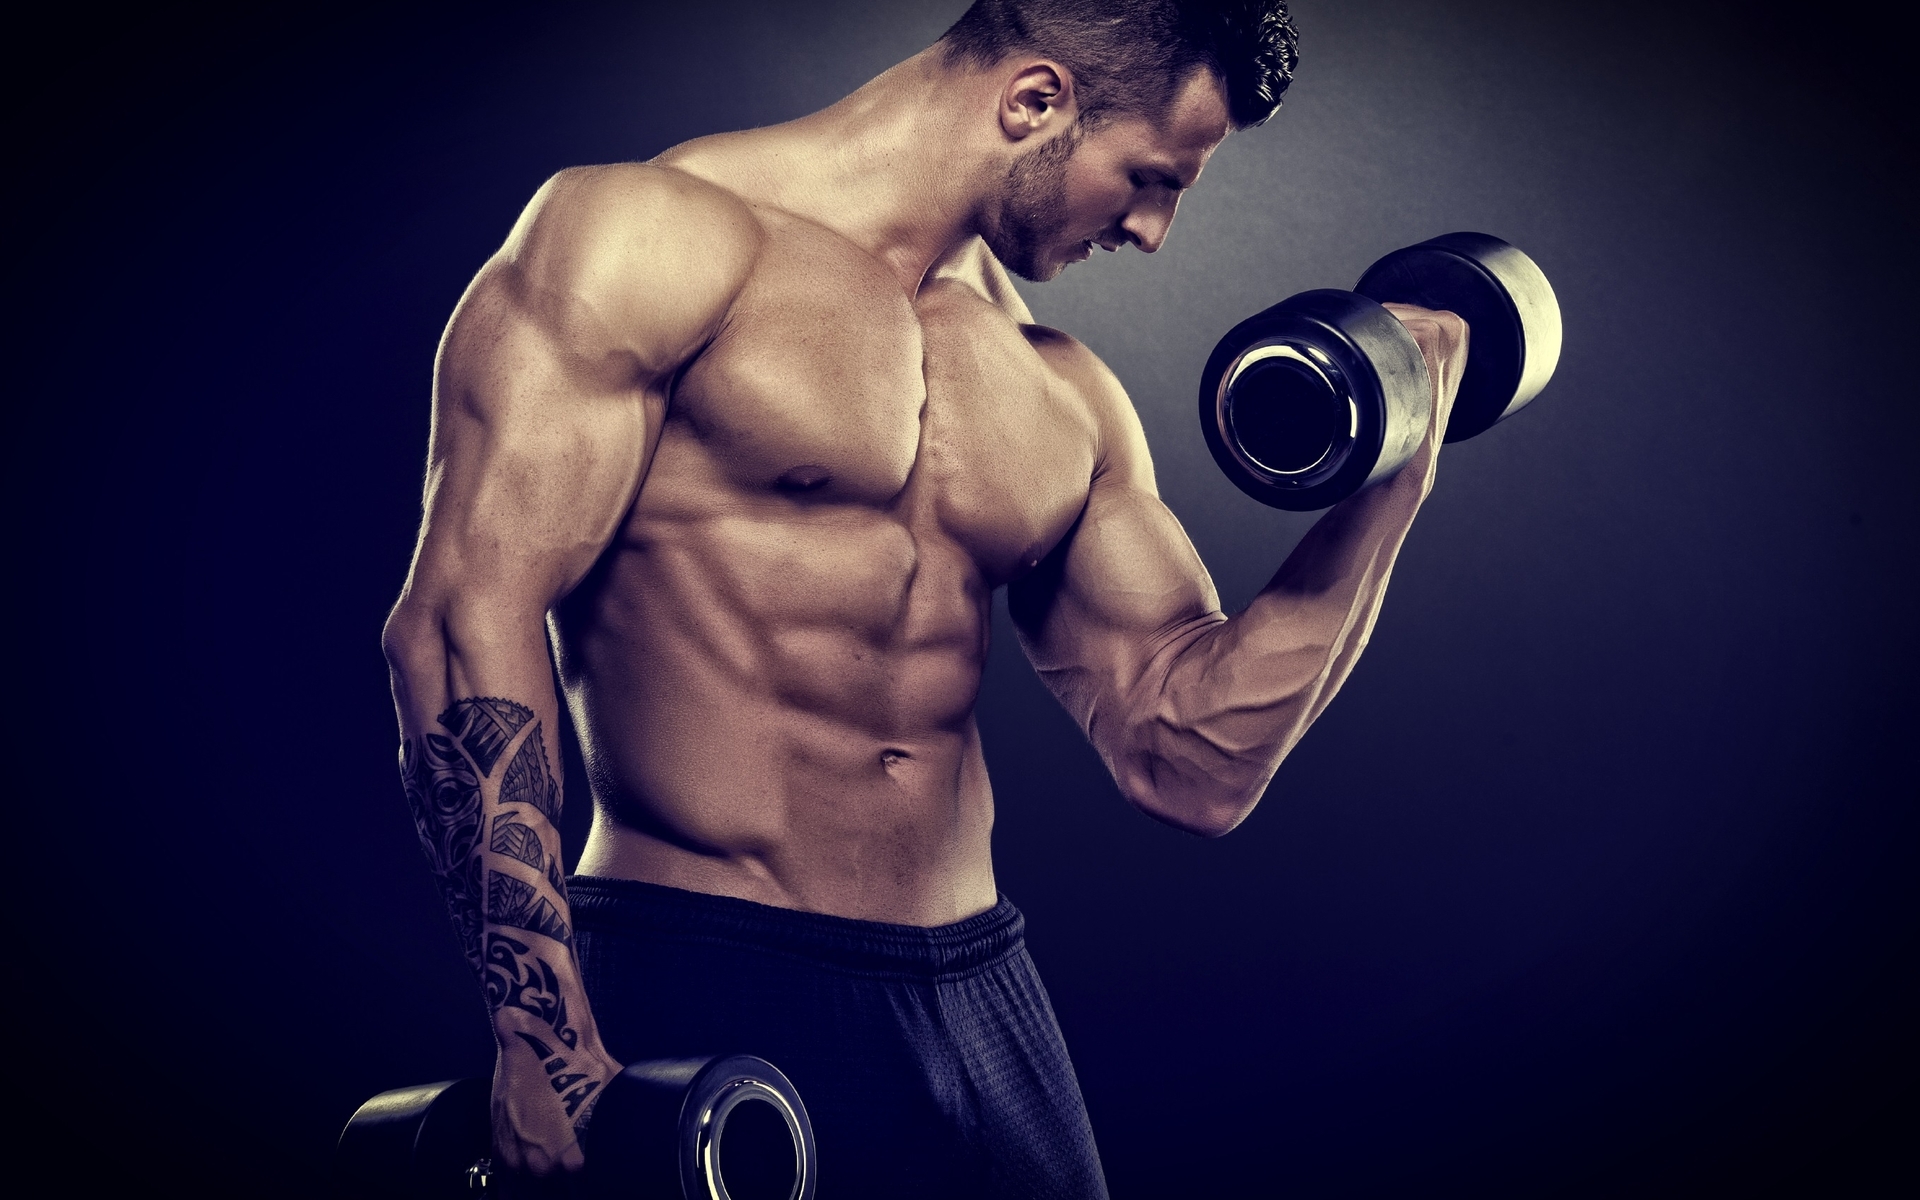 Image: Male, bodybuilder, muscle, body, tattoo, dumbbell